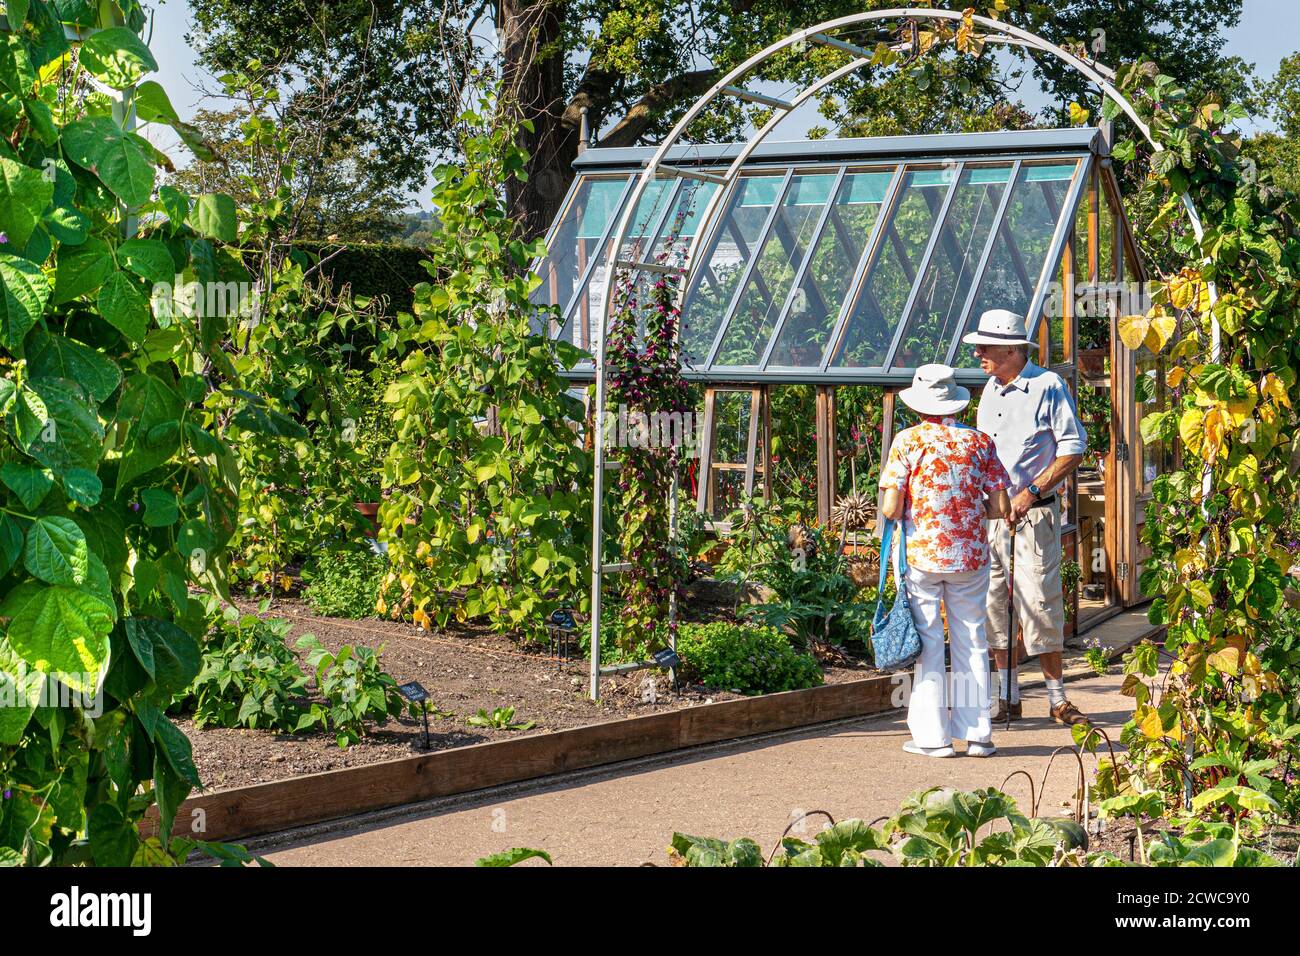 Mature couple horticulture hobby gardeners study the French bean planting area in display vegetable garden, with traditional wooden greenhouse behind Surrey UK Stock Photo